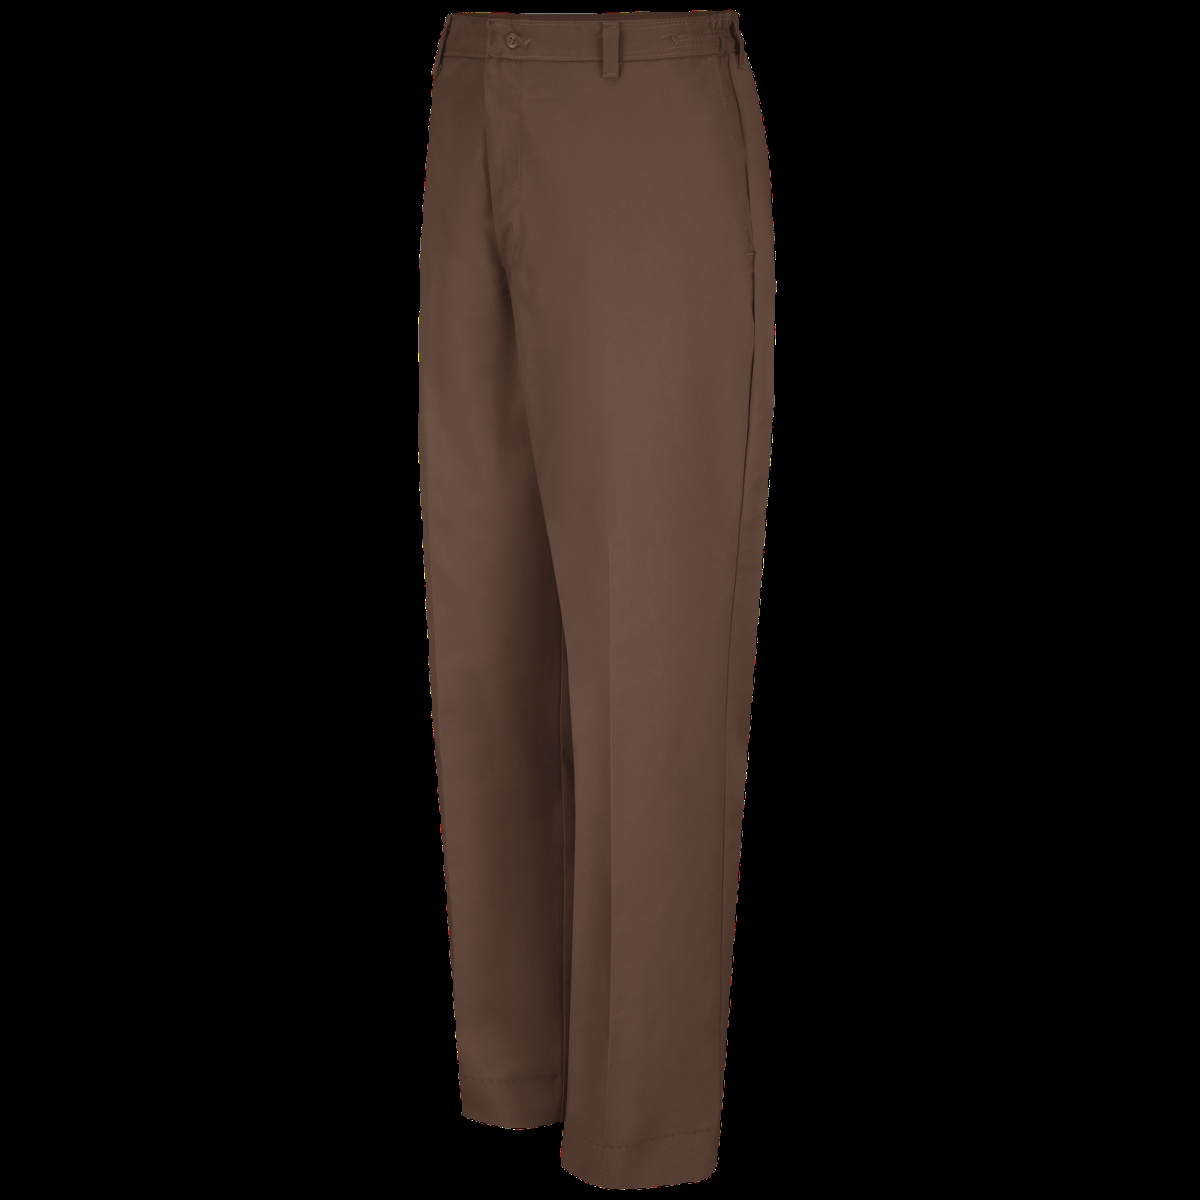 Picture of Red Kap B35430603 Elastic Insert Work Pants, Brown - 37 Unhemmed - Size 34W